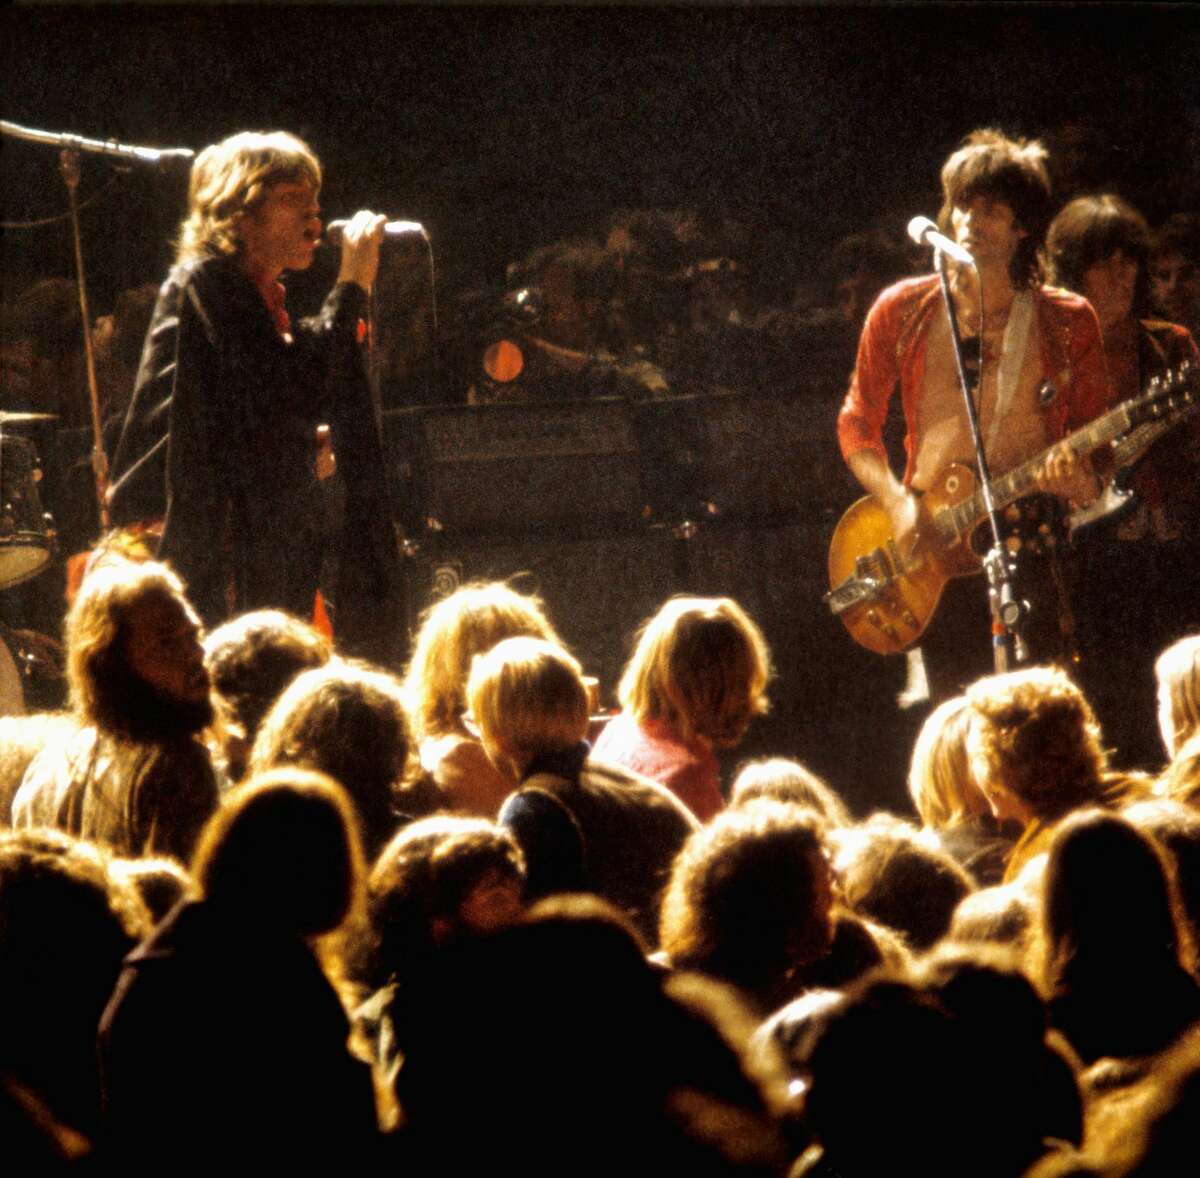 Mick Jagger and Keith Richards of The Rolling Stones at The Altamont Speedway on December 6, 1969.